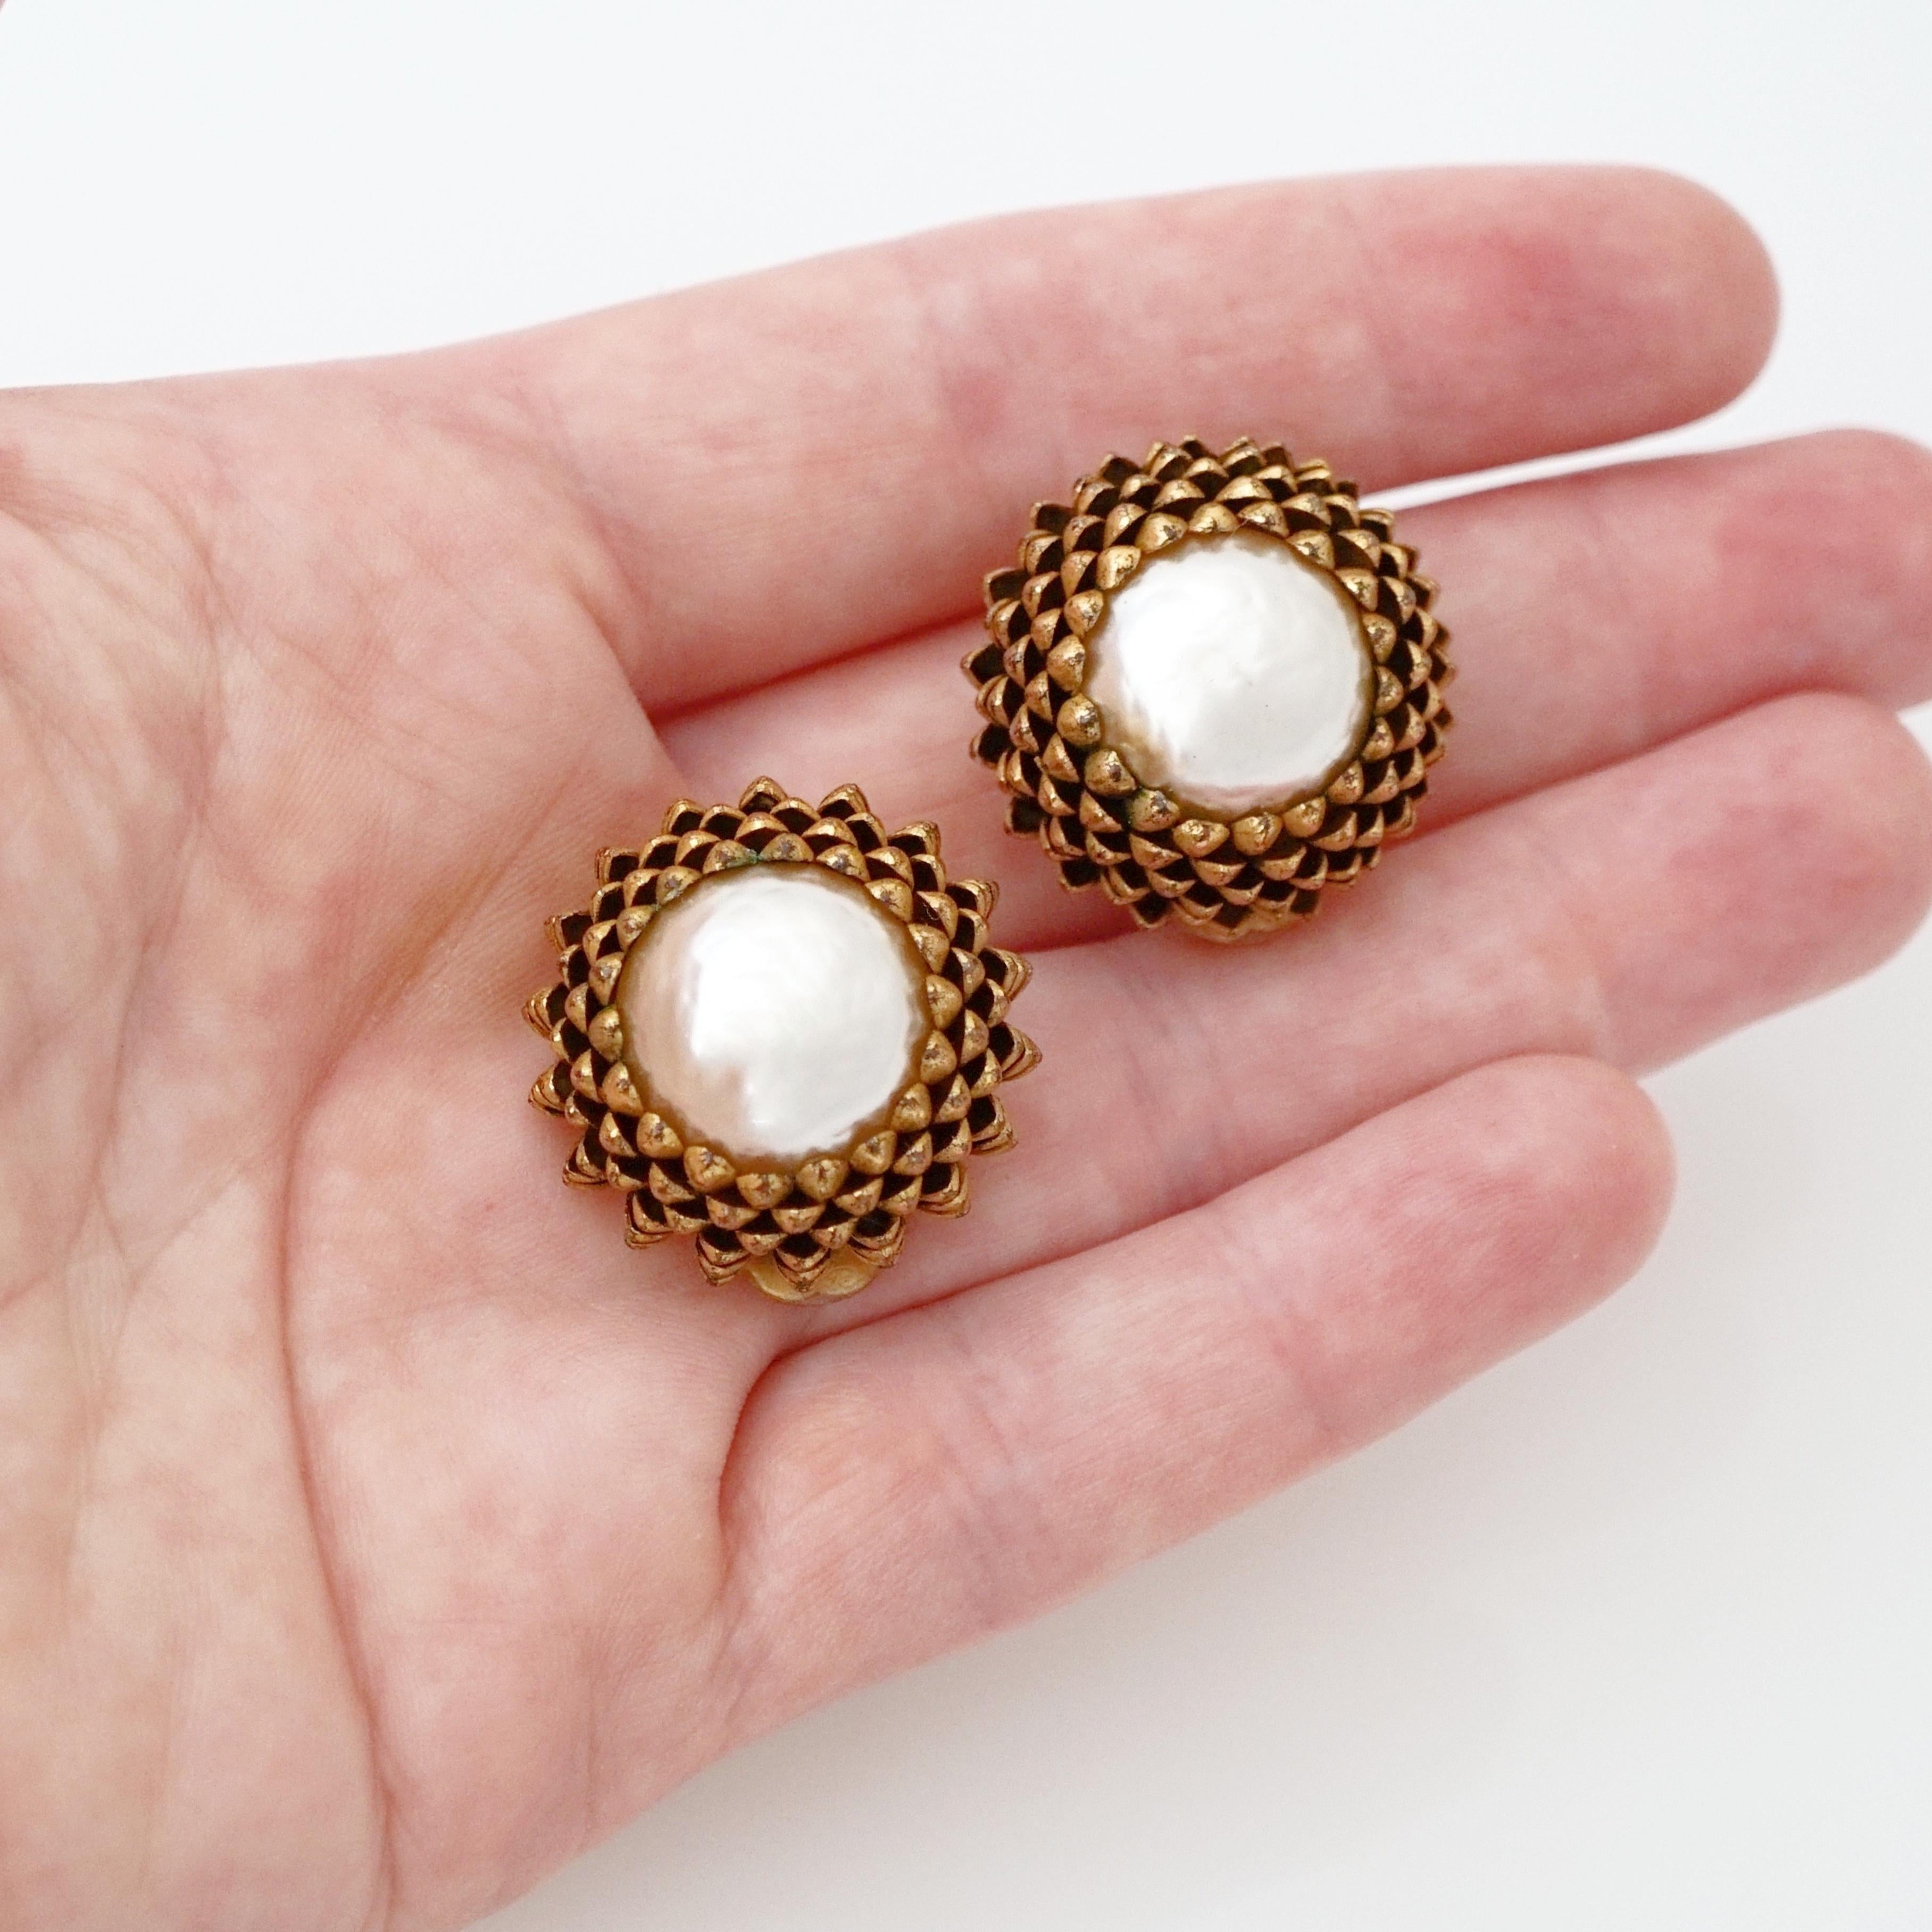 Gold Dome Acorn Earrings With Baroque Pearls By Miriam Haskell, 1950s For Sale 1